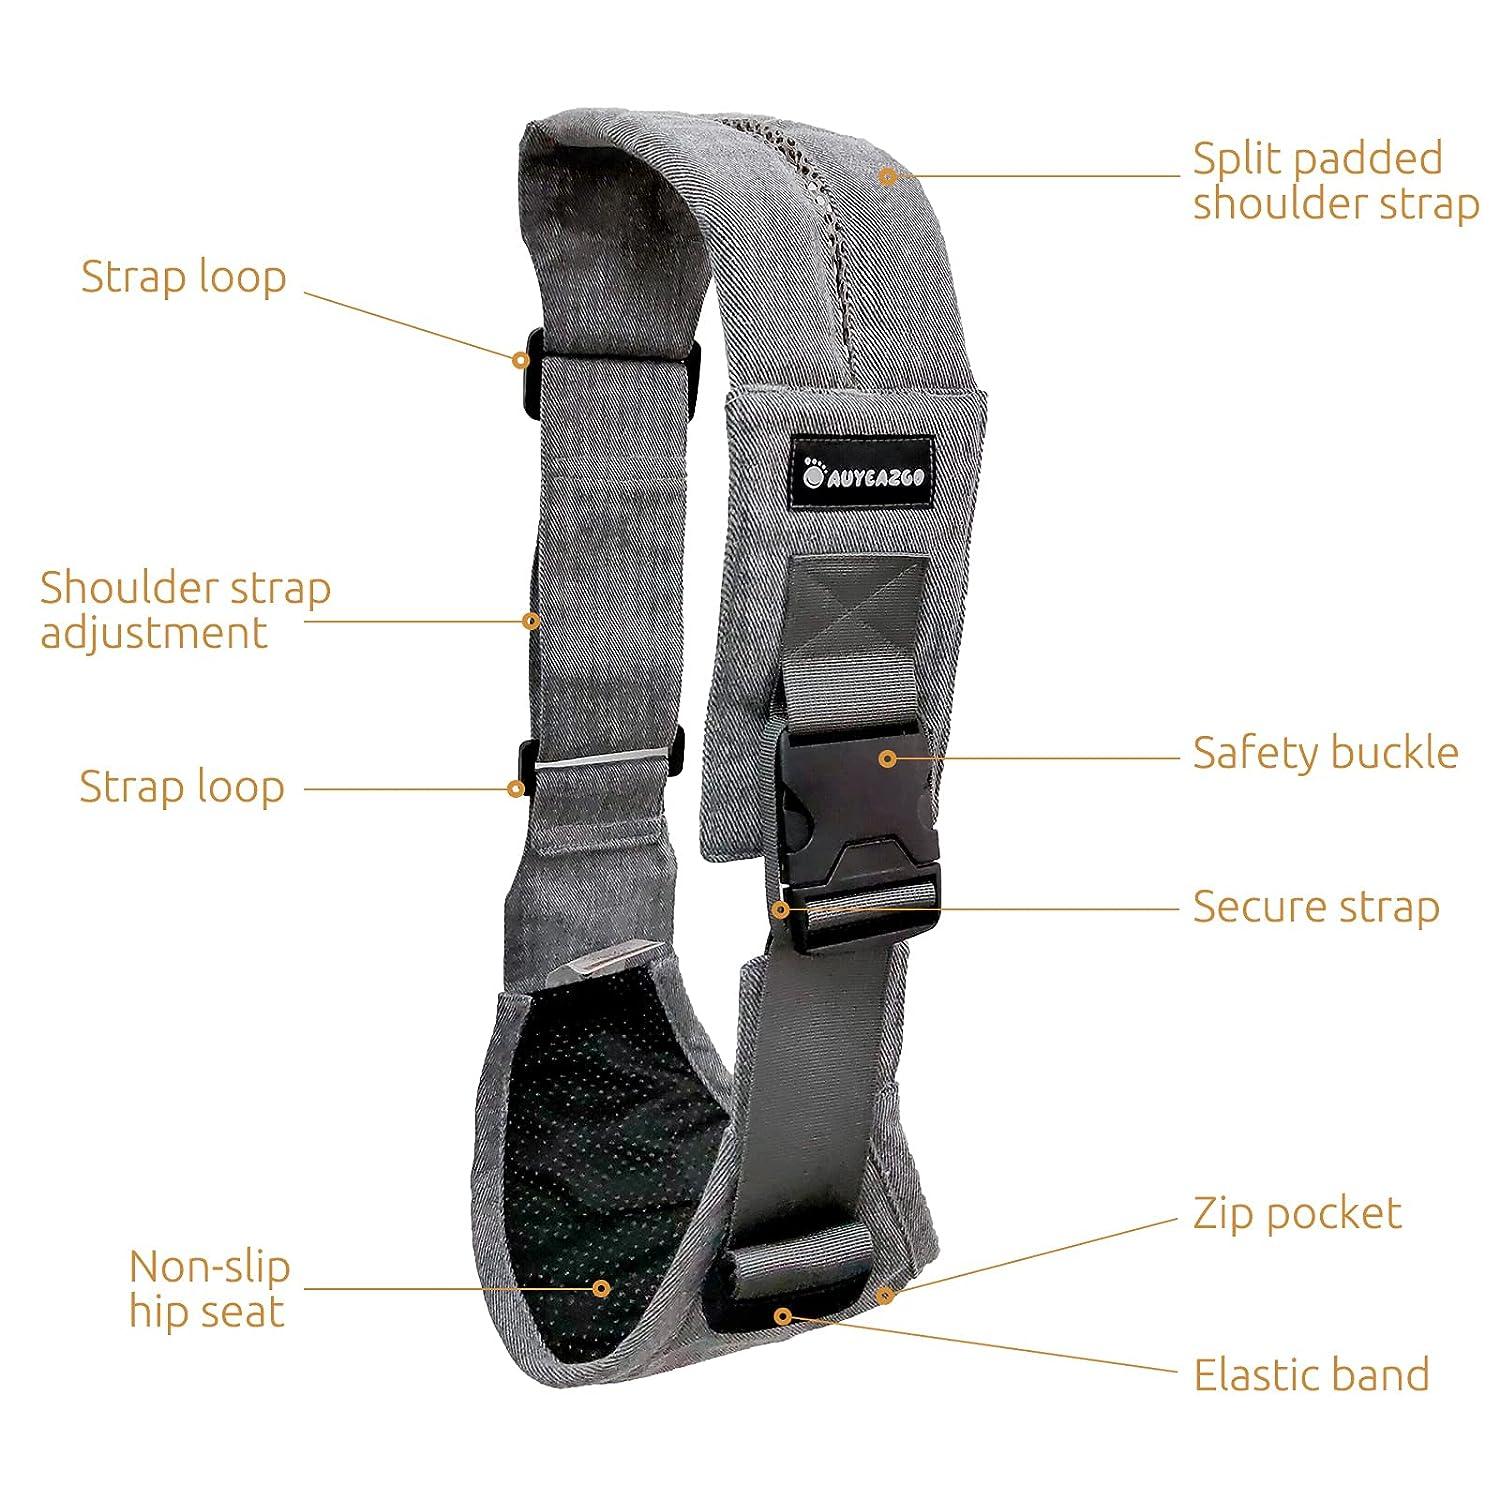 AUYEAZGO Toddler Sling, Ergonomic Baby Sling Carrier with